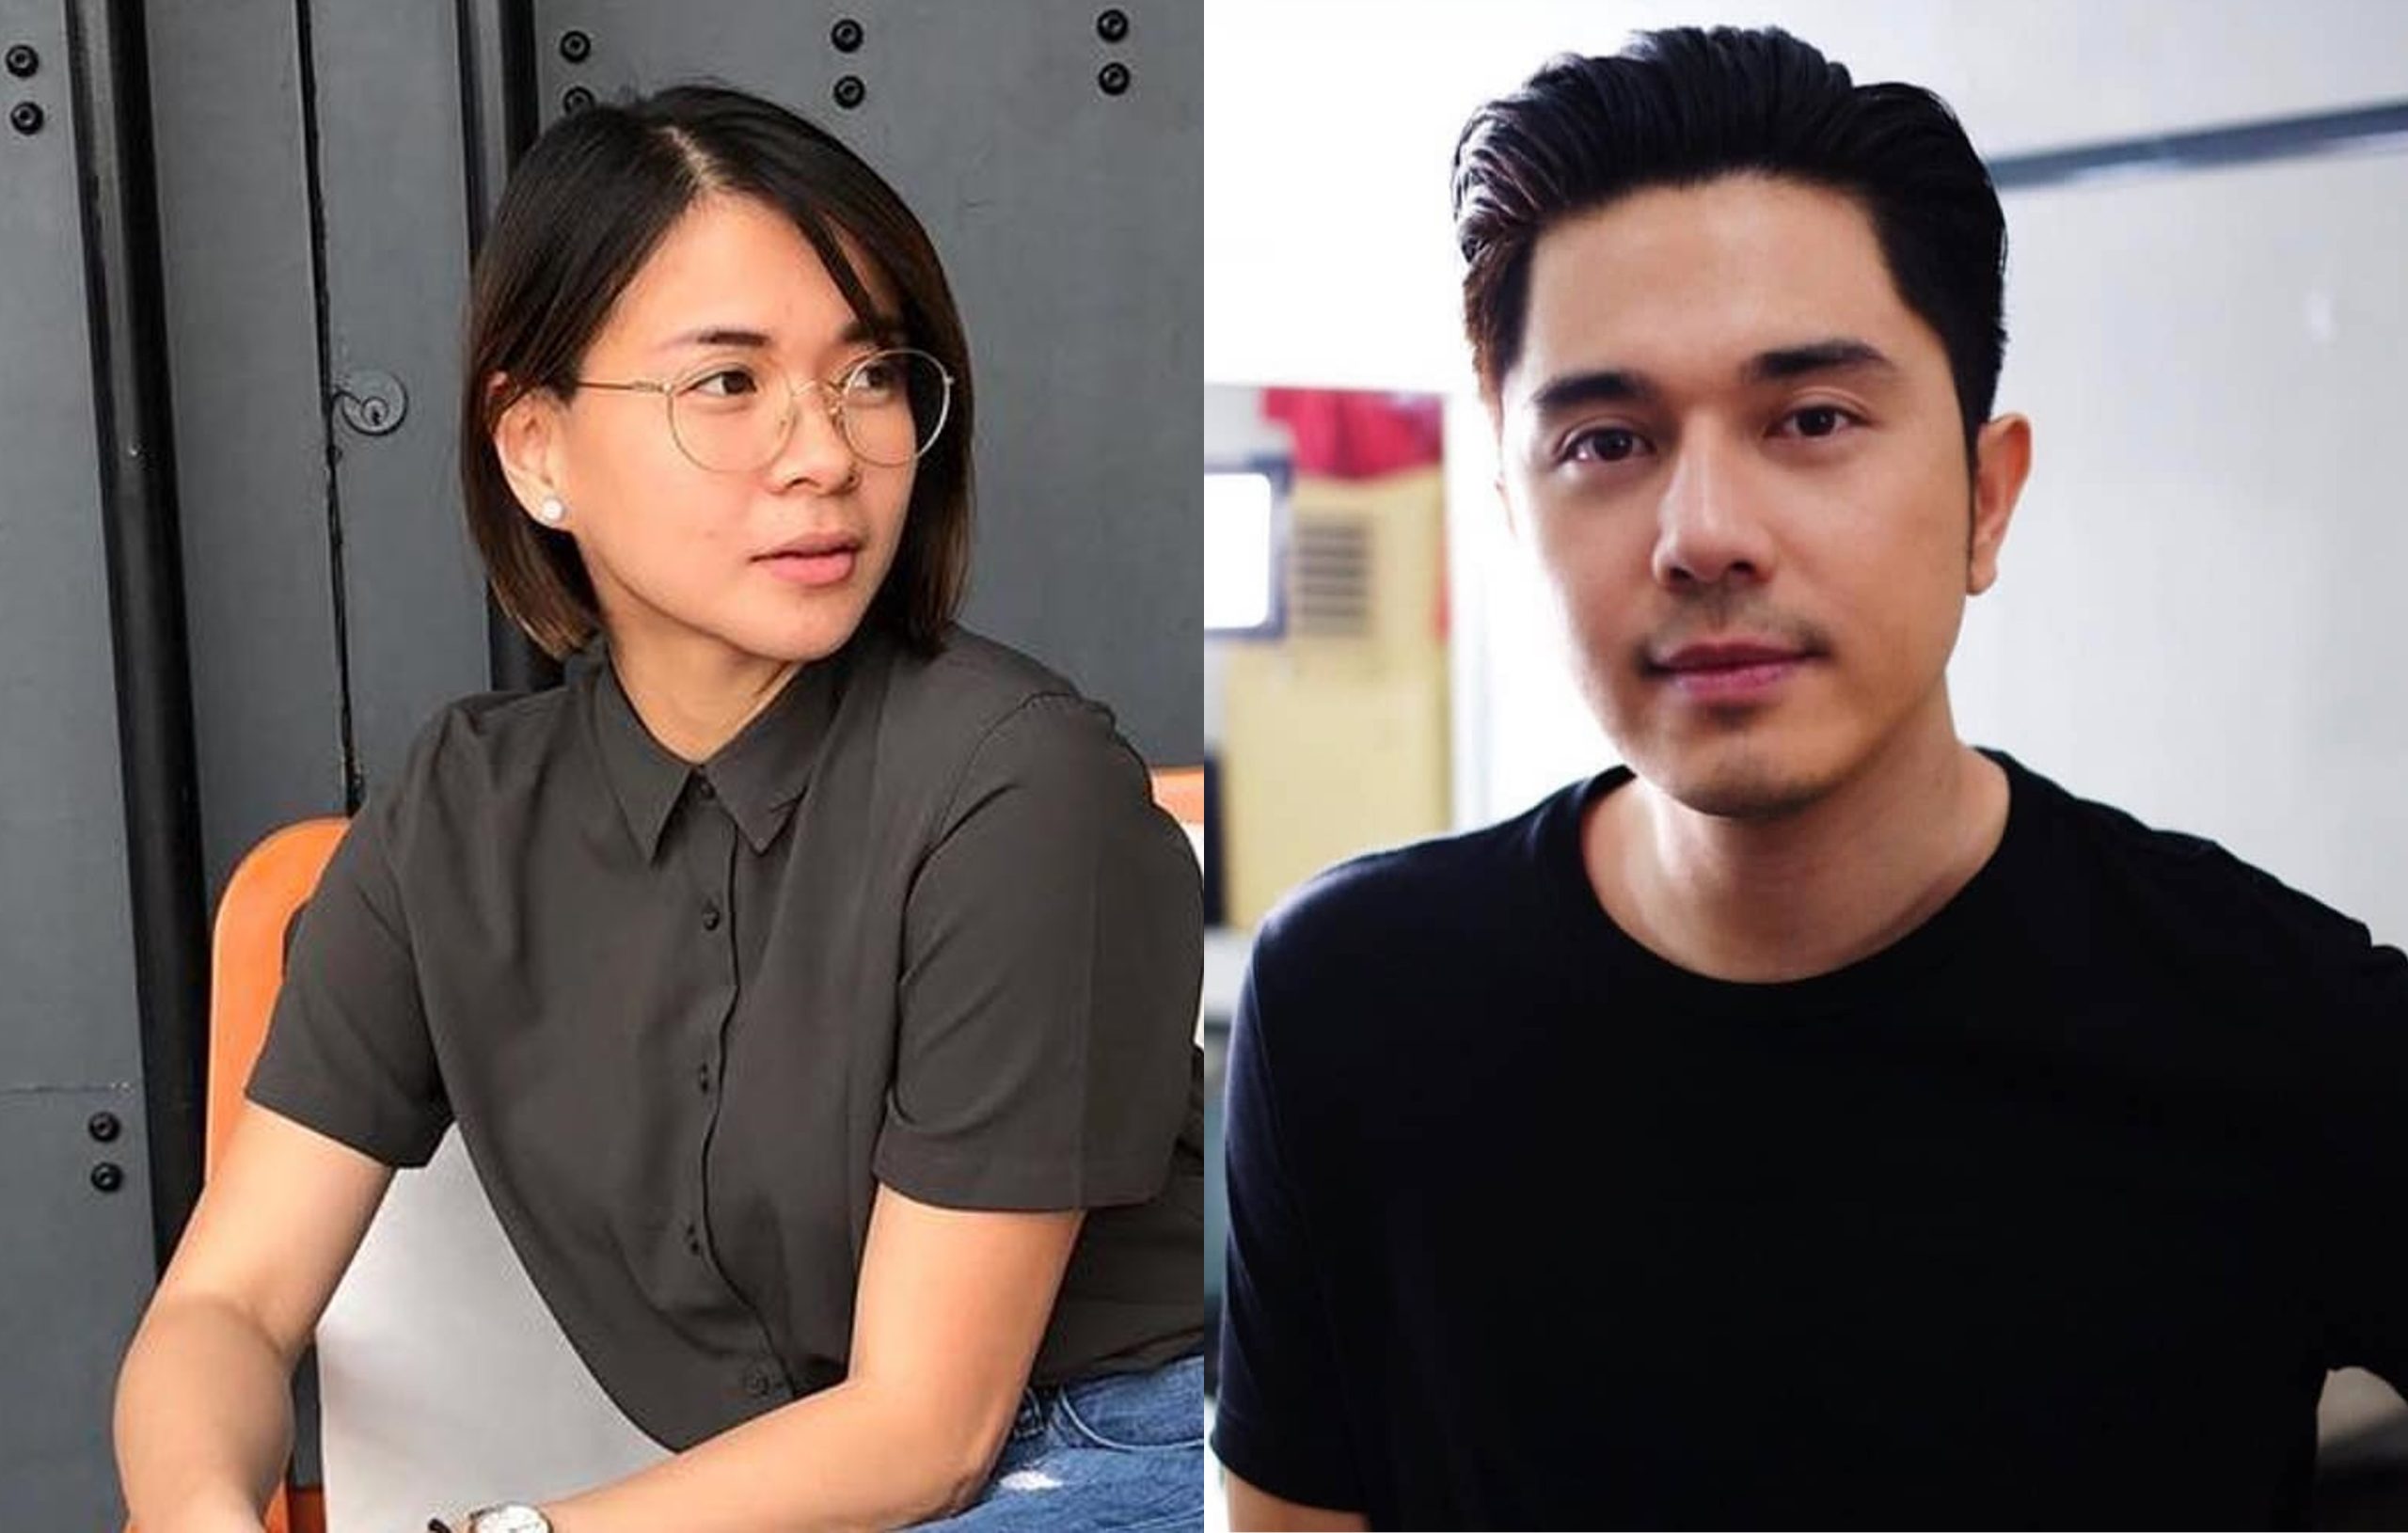 Lj Reyes Reveals Paulo Avelino Reached Out To Her No Word Yet From Paolo Contis The Filipino